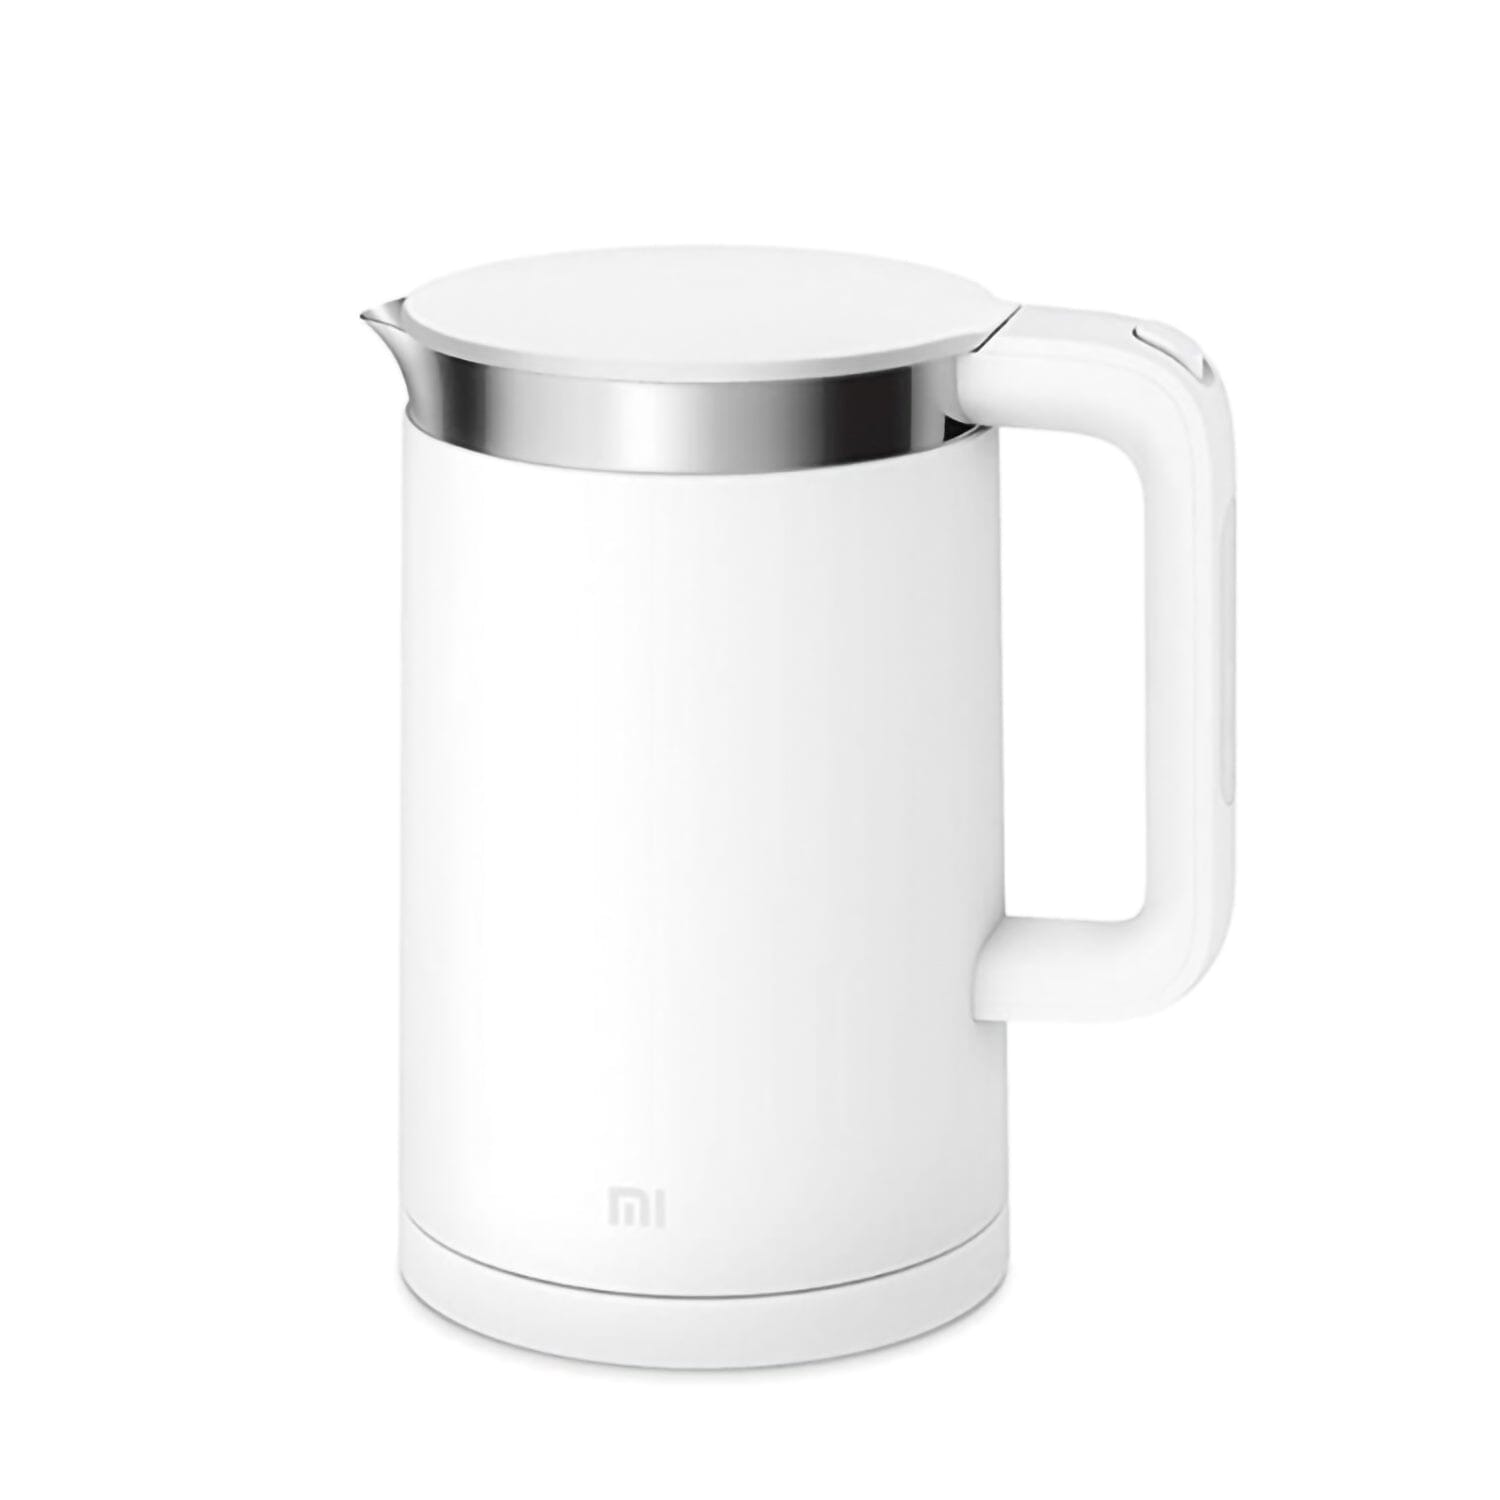 http://one2world.com.sg/cdn/shop/products/xiaomi-mi-smart-electric-kettle-pro-1800w-fast-boiling-15l-stainless-steel-with-led-digital-screen-and-app-control-via-bluetooth-local-official-warranty-xiaomi-549296.jpg?v=1671533127